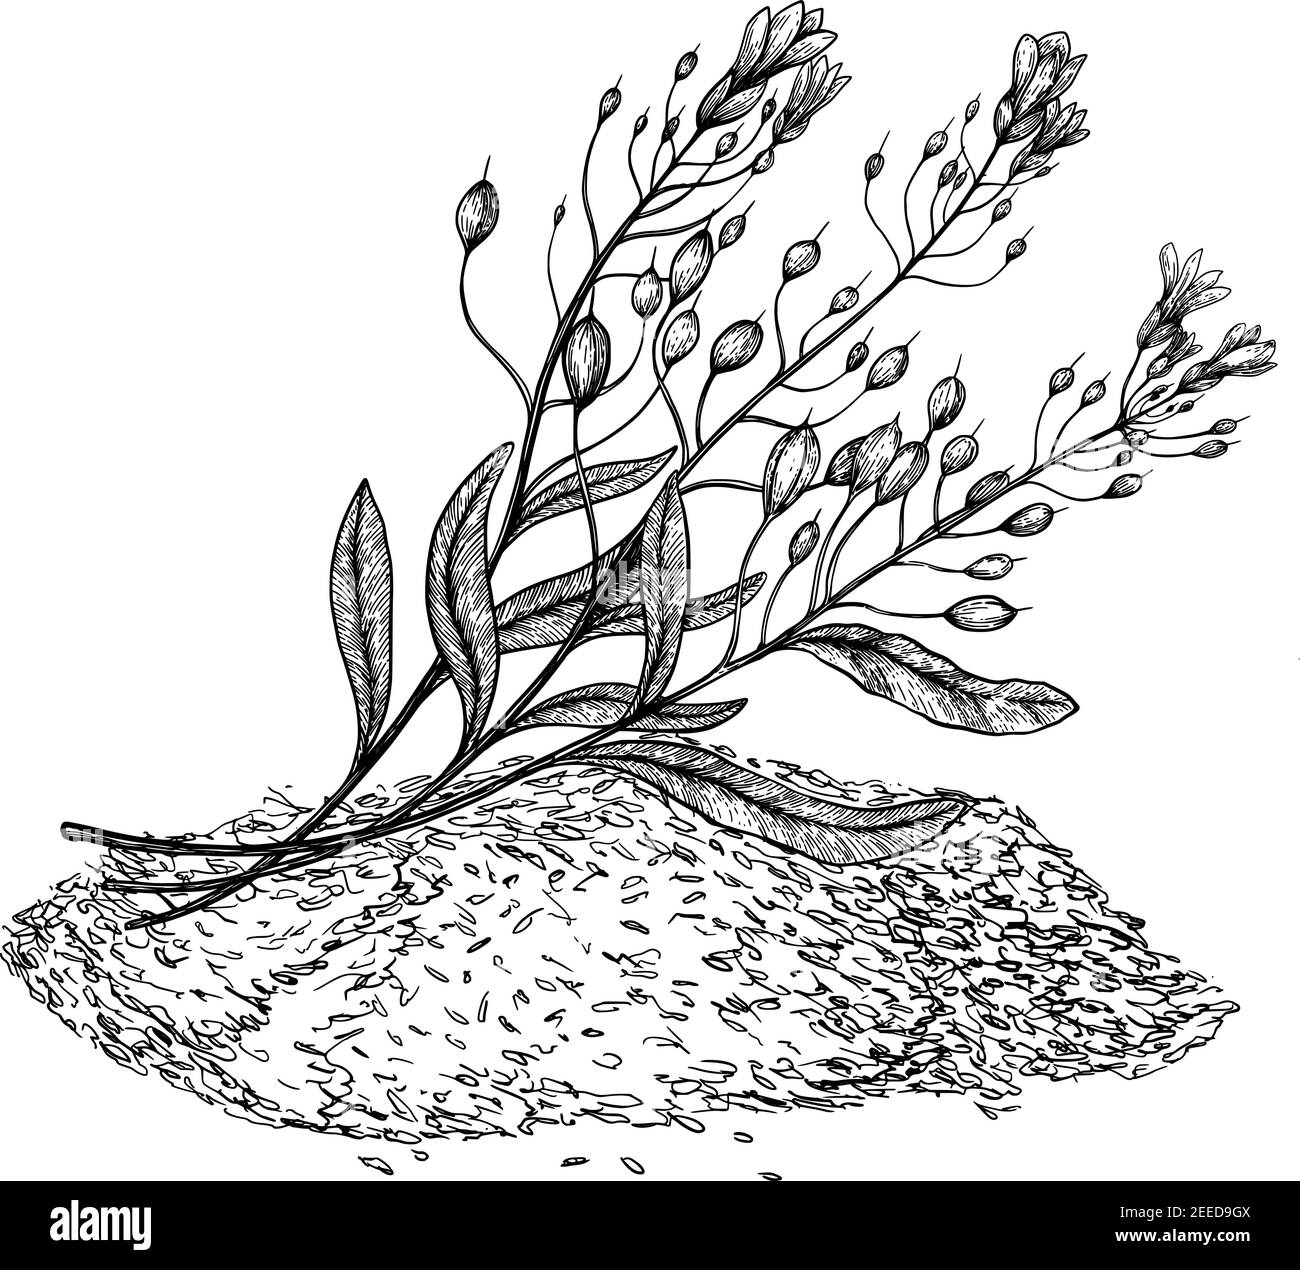 Camelina sativa seeds with flowers and leaves. Hand drawn on white background. Engraving drawing style. Stock Vector